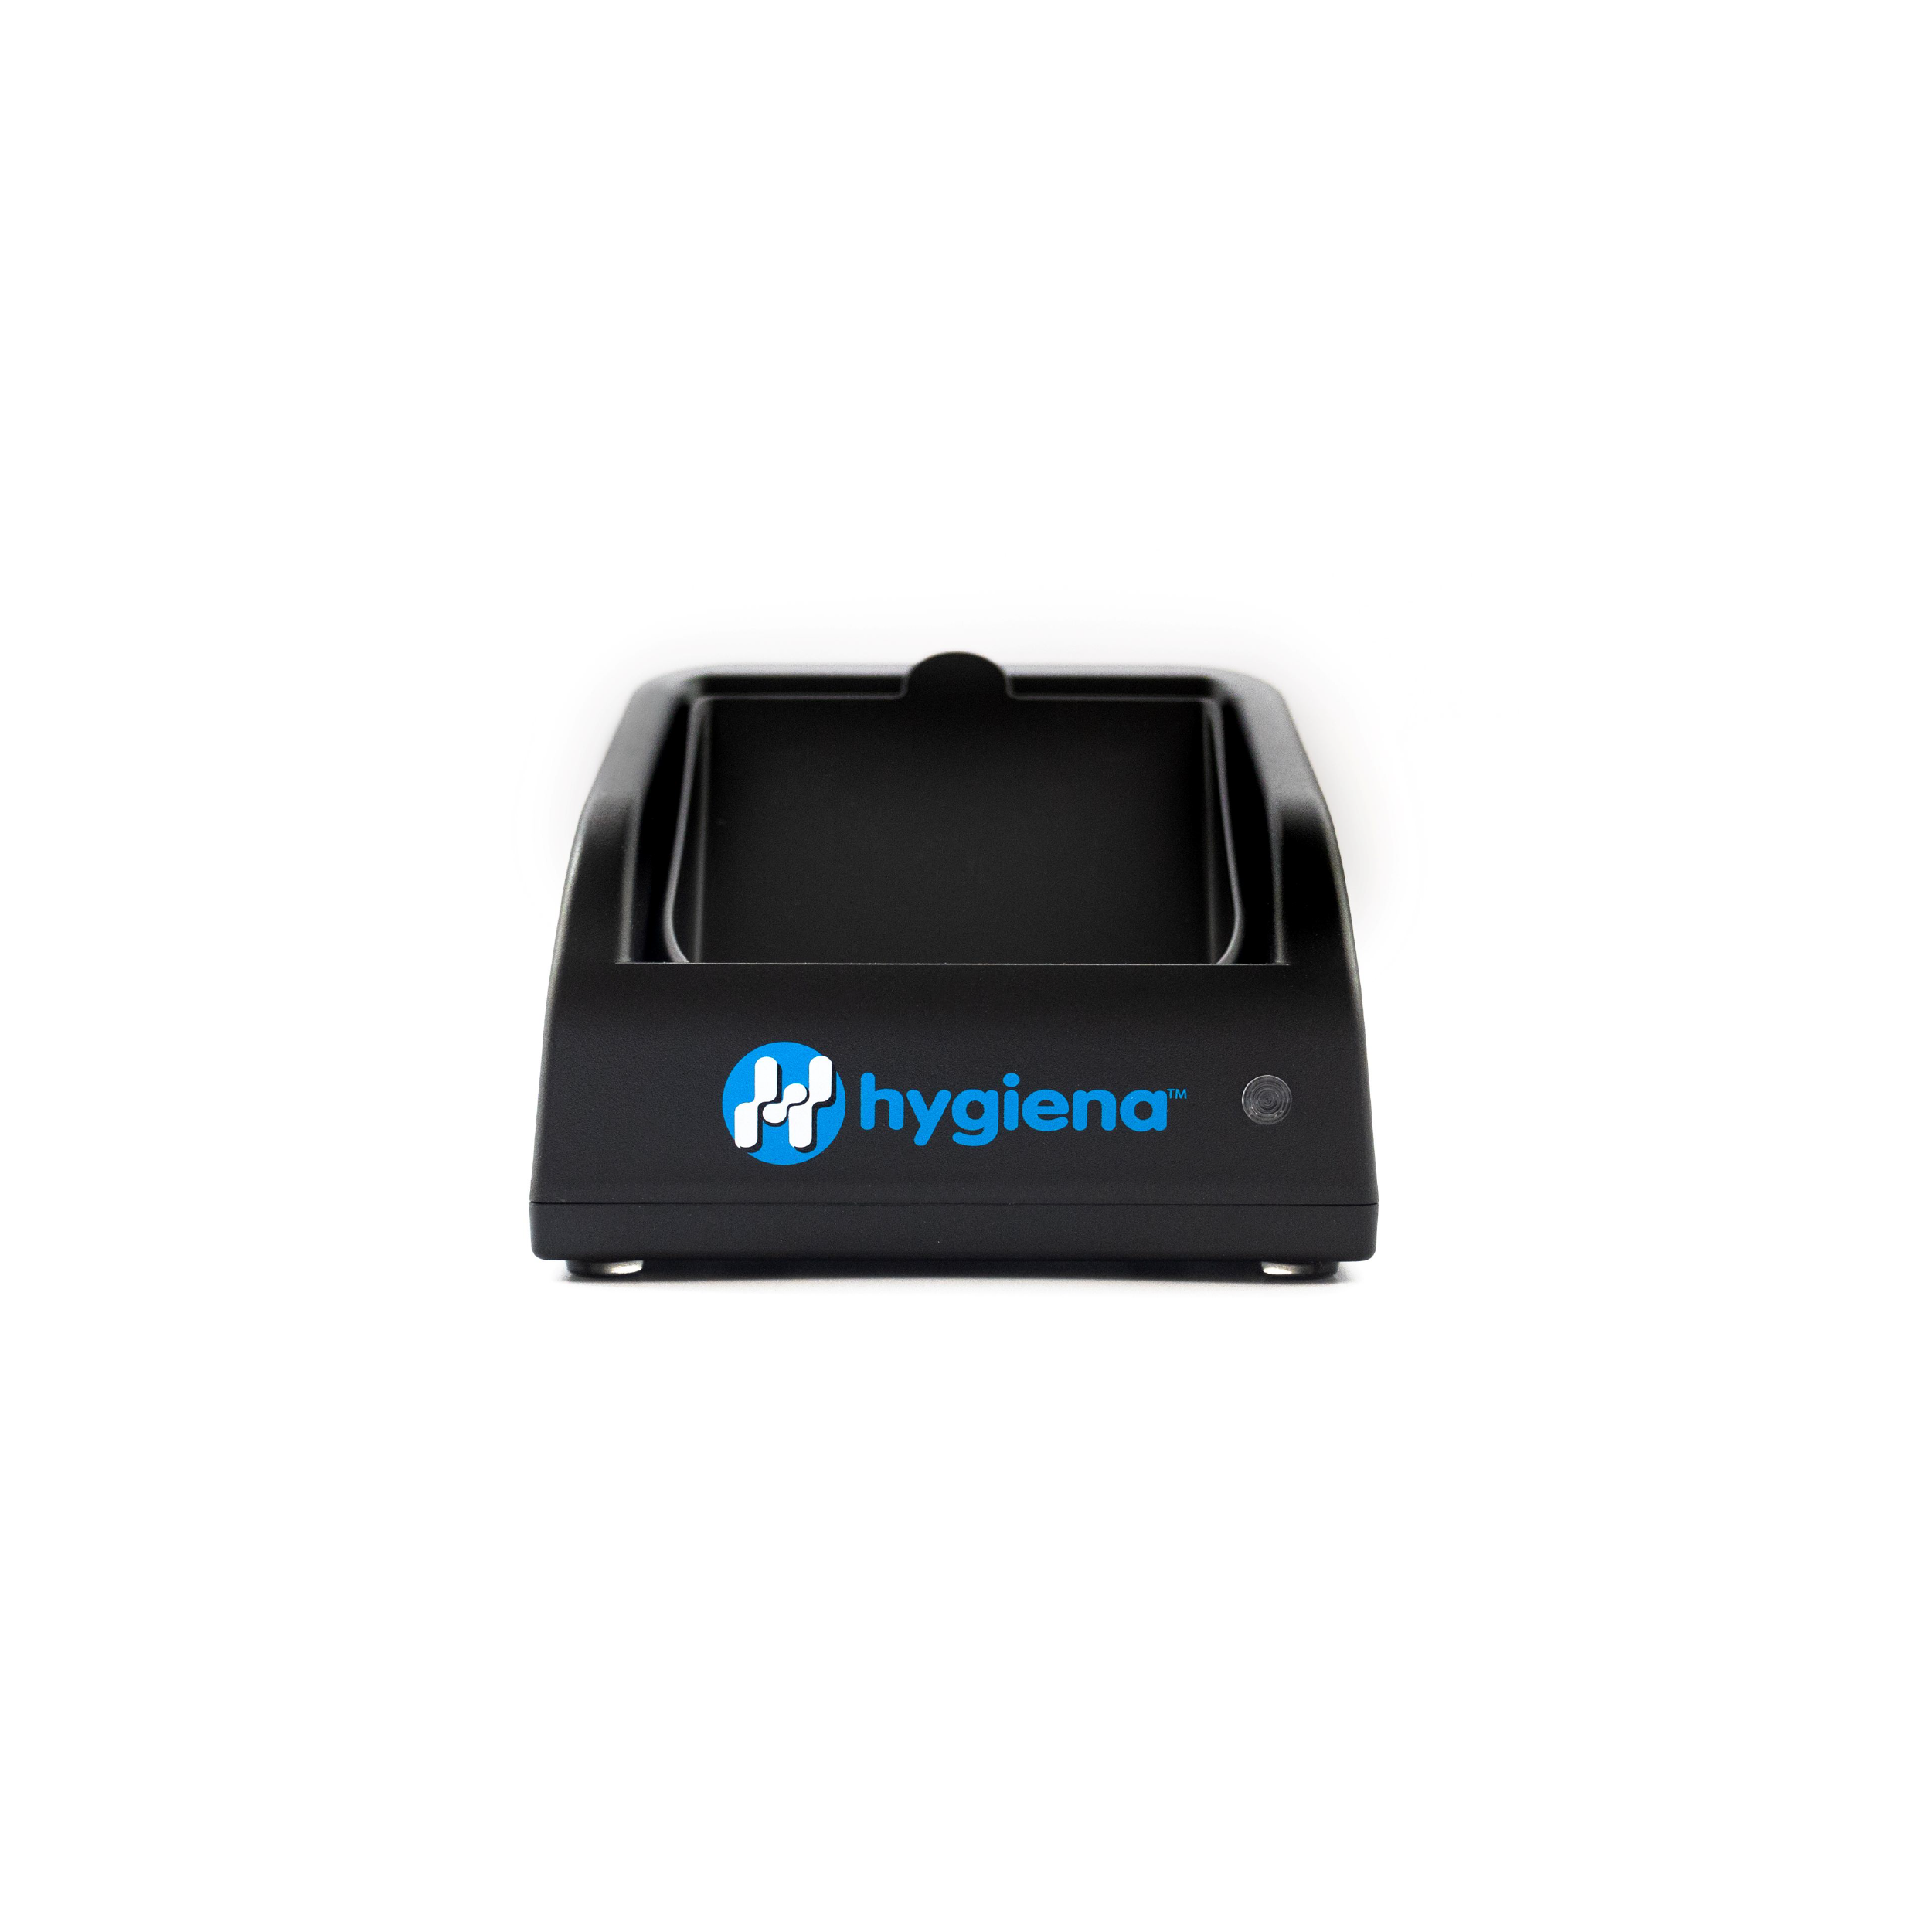 Hygiena Ensure touch charging dock